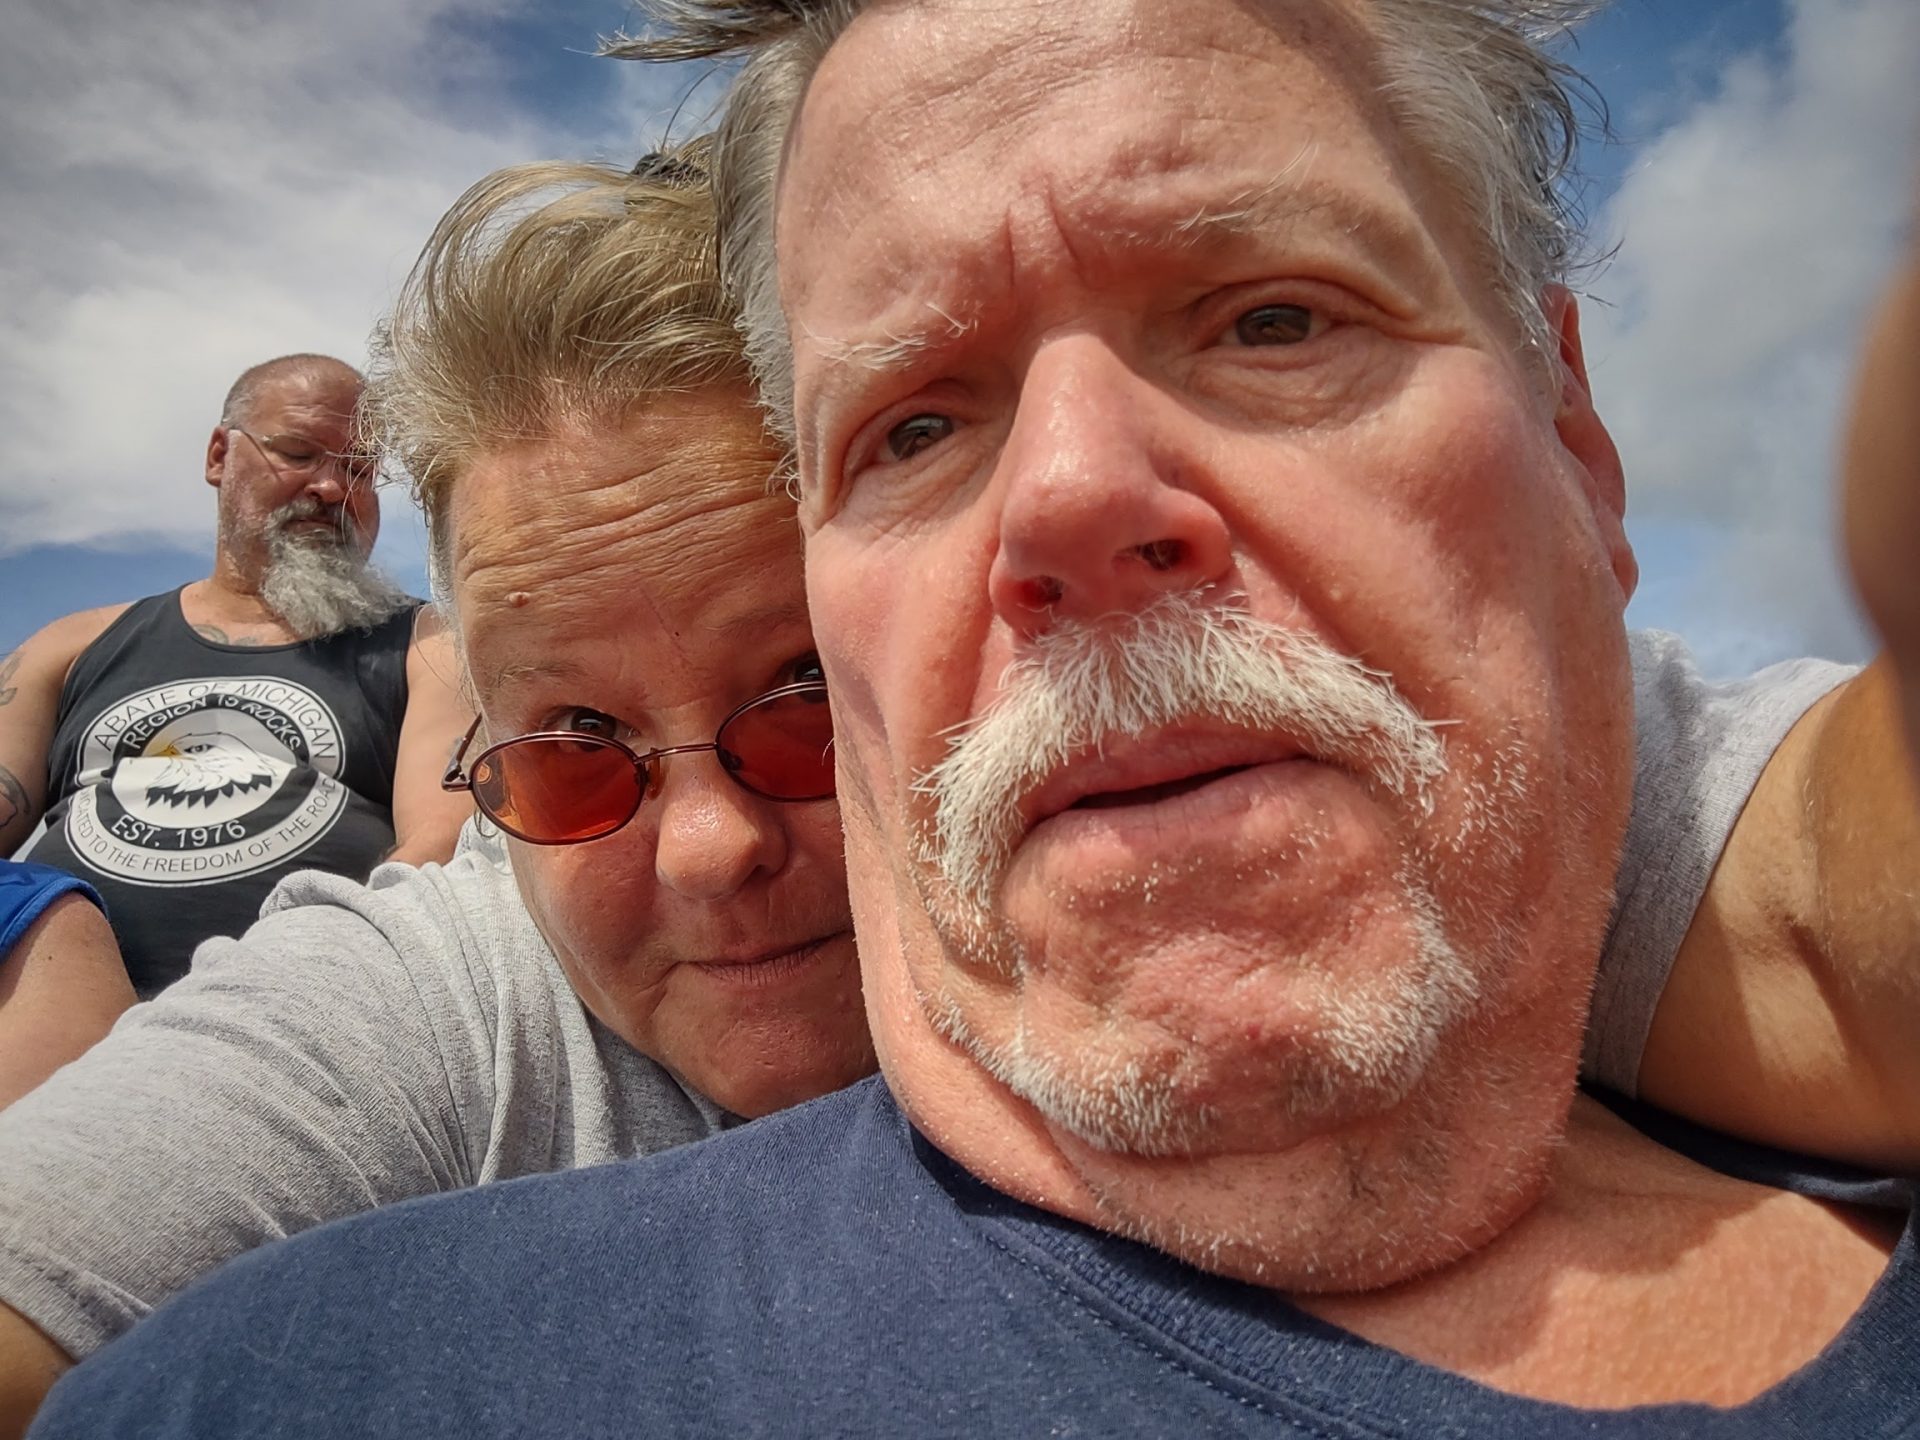 I miss you so much daddy. It's been 2 months today. This was our first time ever on a airboat. So glad we got to do it together. Give everyone a hug from me. Love you so much.